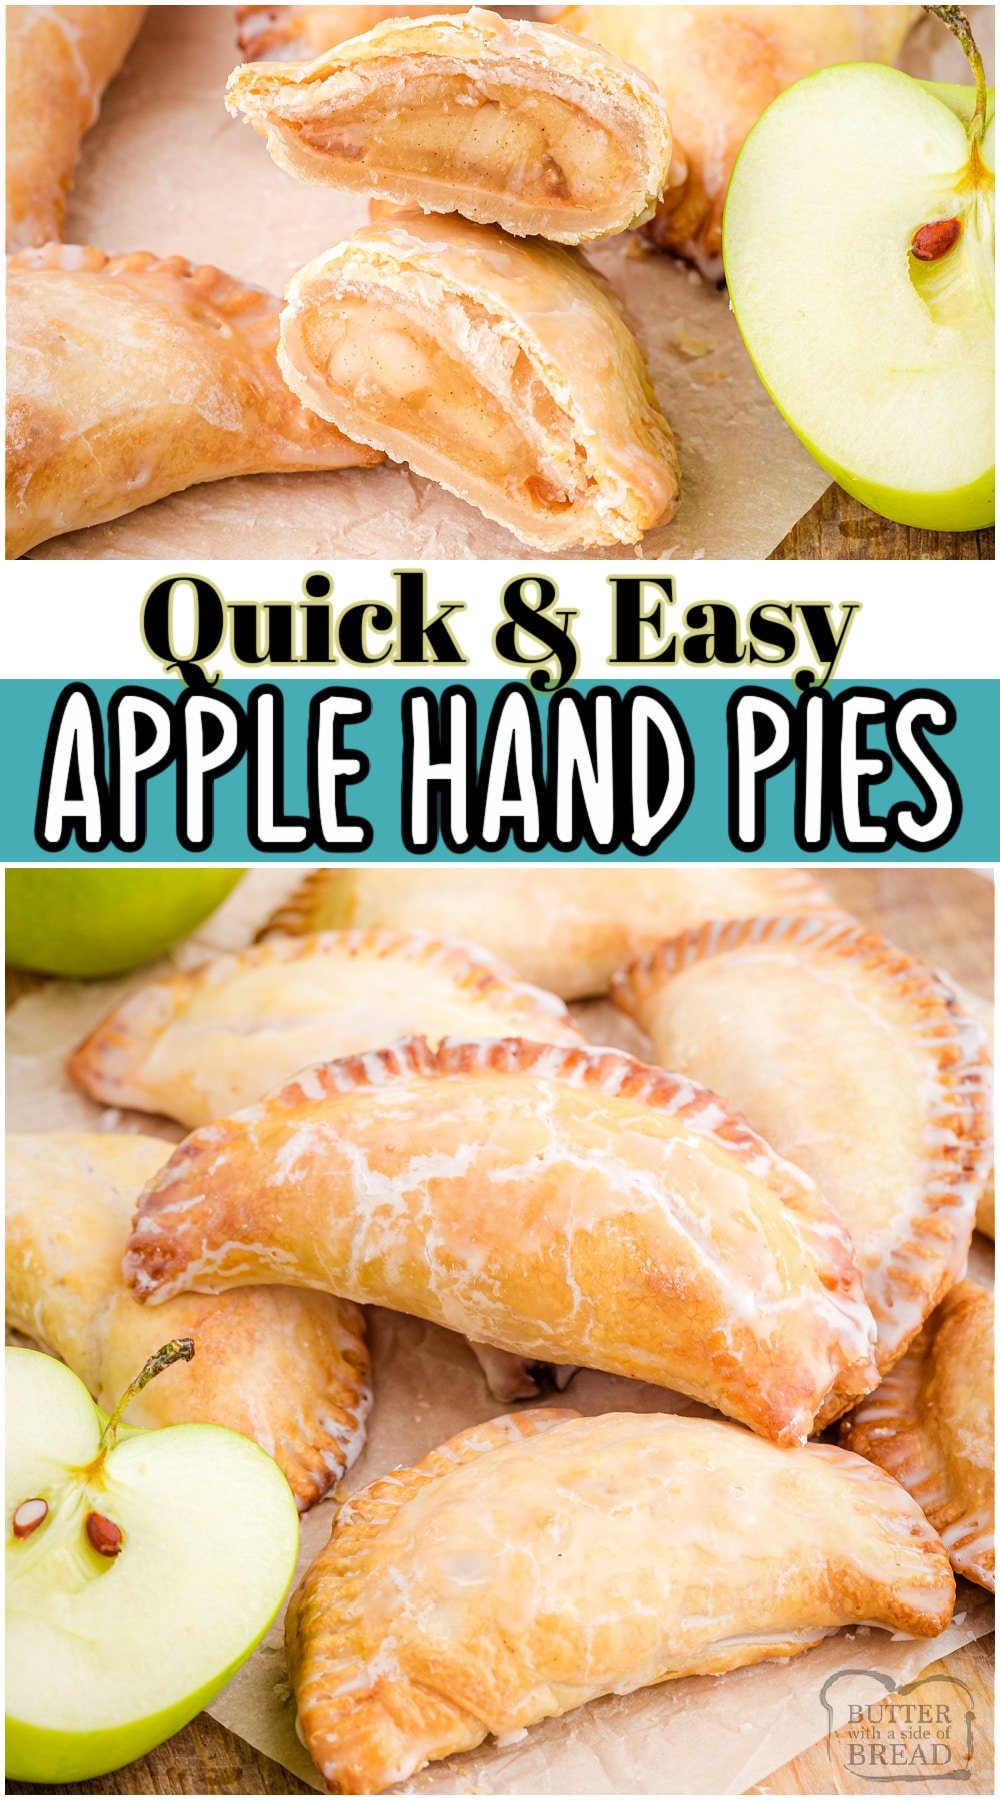 Easy Apple Hand Pies made with fried cinnamon apples, a buttery crust & topped with a simple glaze. These adorable apple hand pies are pure comfort food & taste just like individual apple pies.